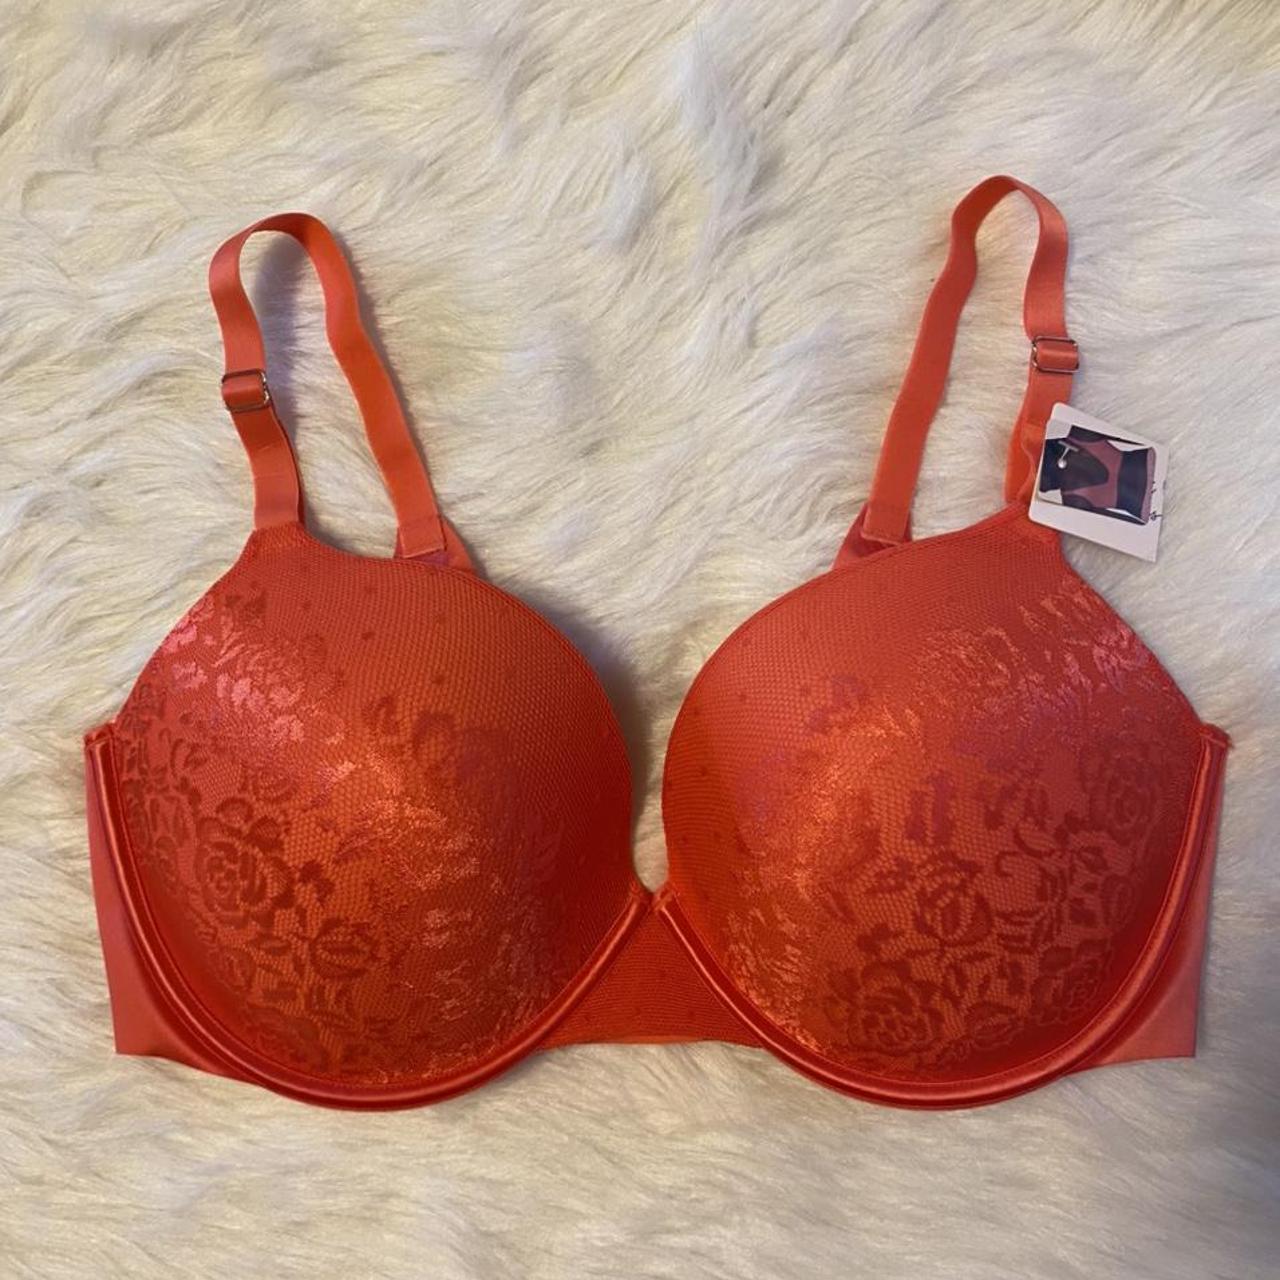 Secret Treasures💗Red Rover Back Smoothing Lace Push Up Bra💗36DD